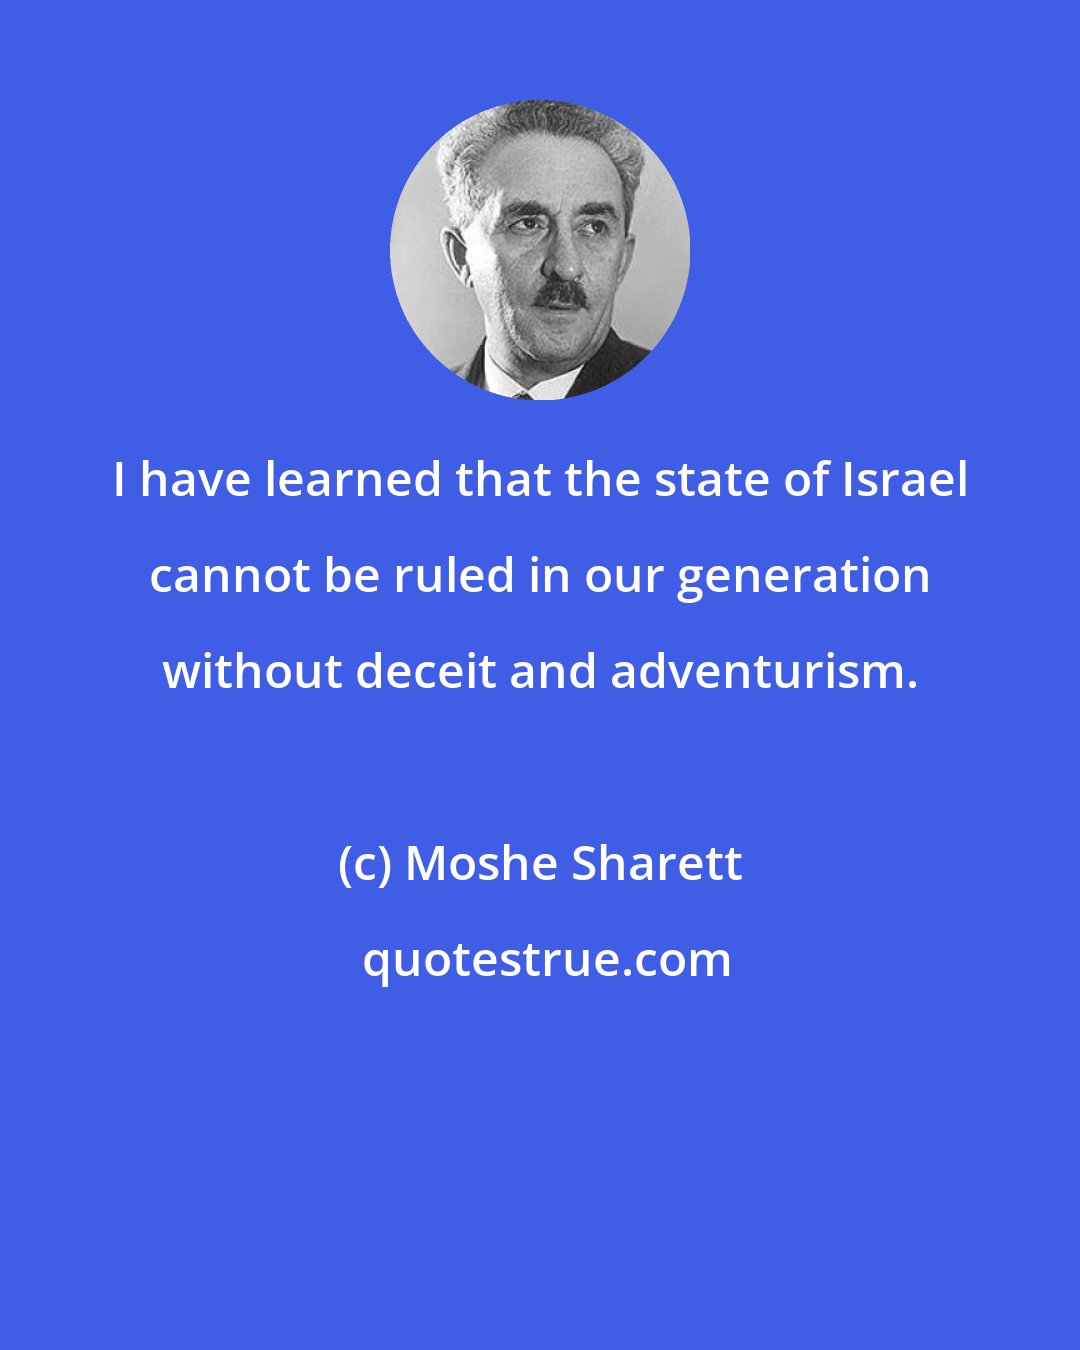 Moshe Sharett: I have learned that the state of Israel cannot be ruled in our generation without deceit and adventurism.